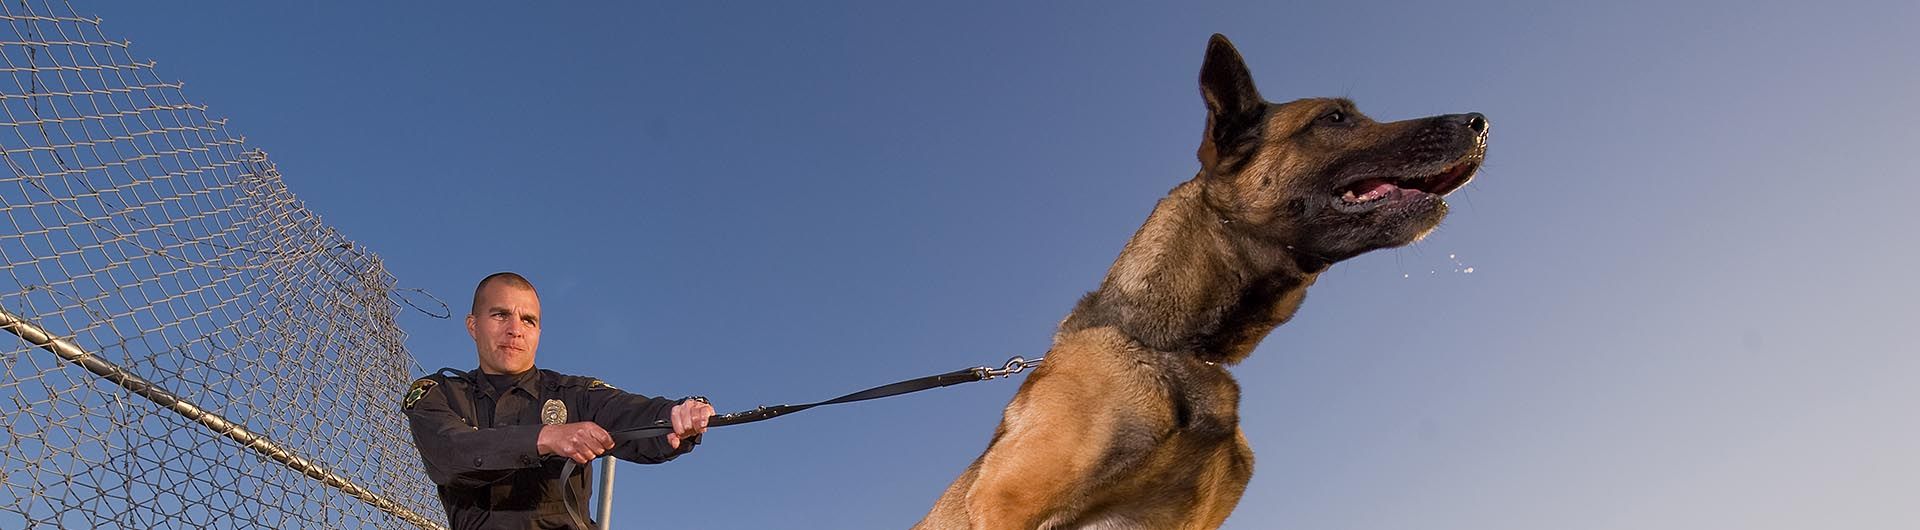 K9 Dogs - Security Dogs